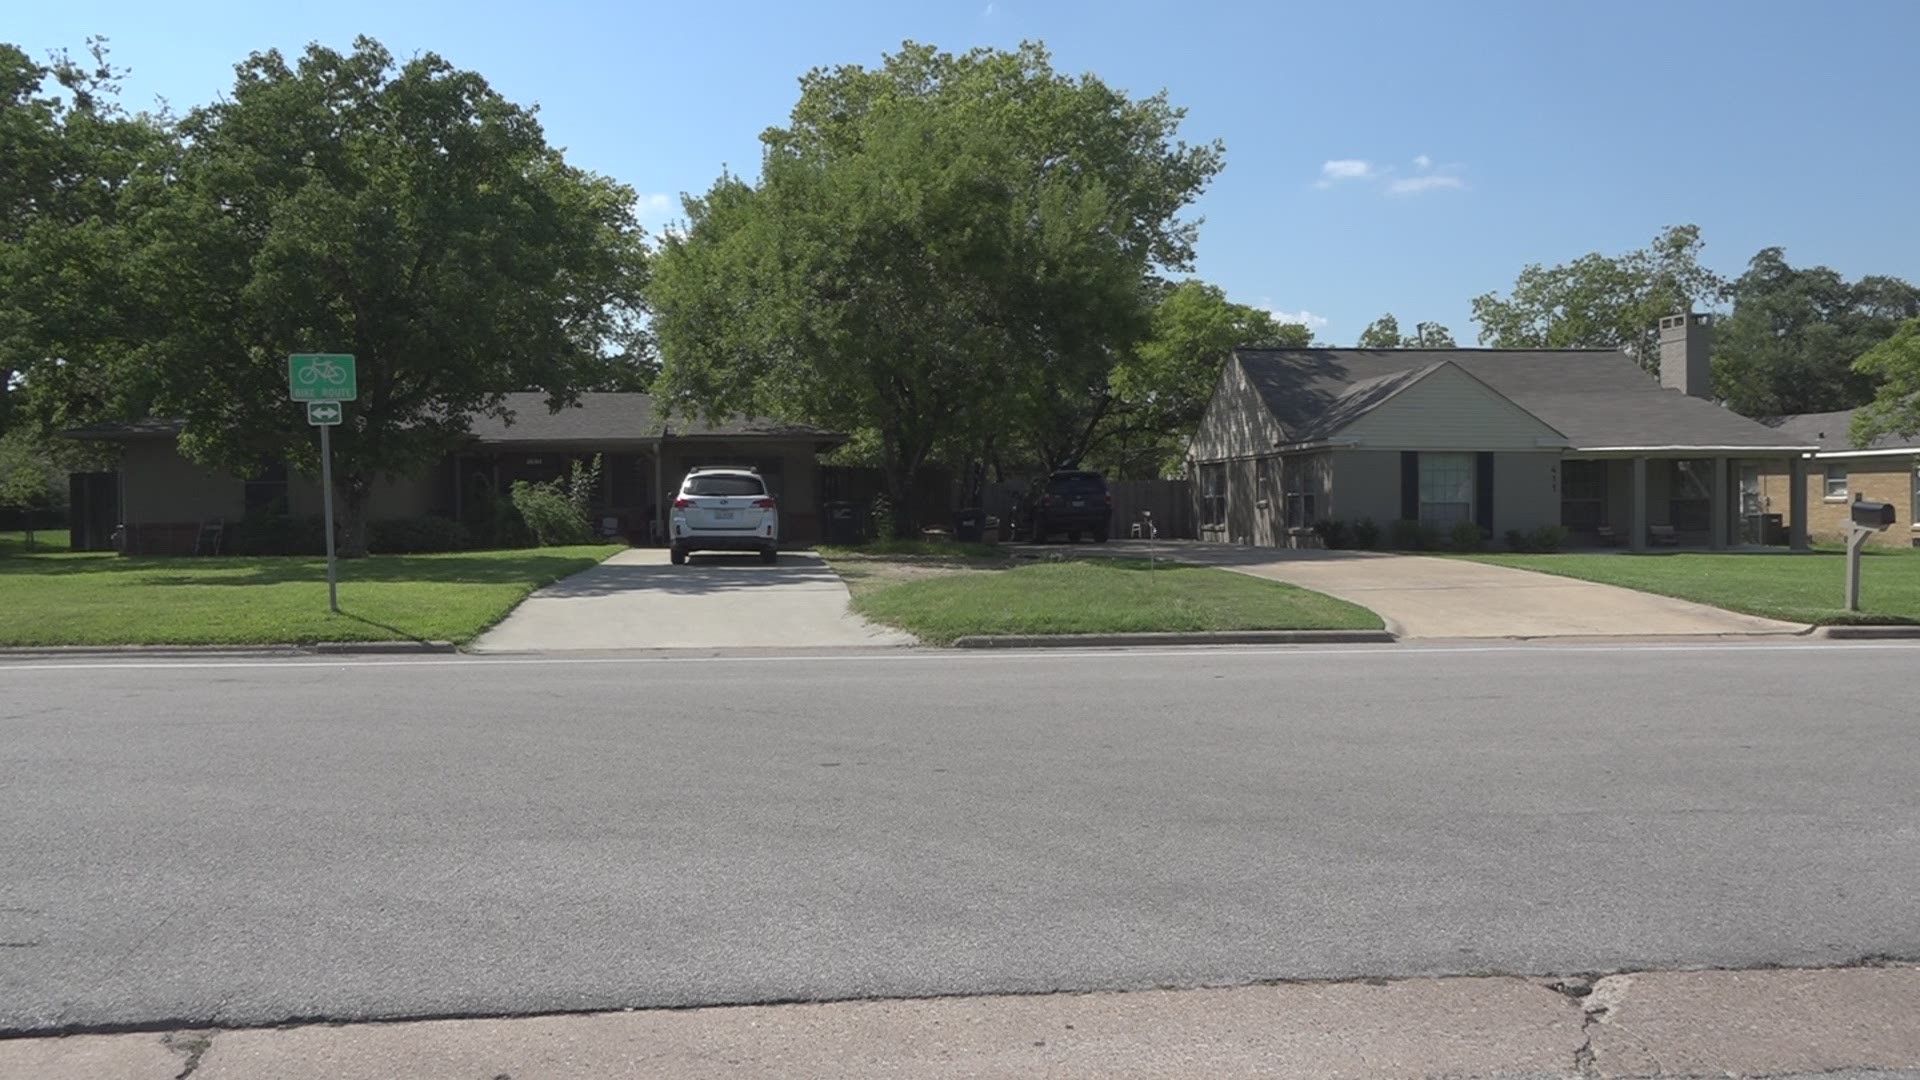 The City of College Station is taking feedback for a proposed ordinance that would allow subdivisions to petition for occupancy restrictions in homes.